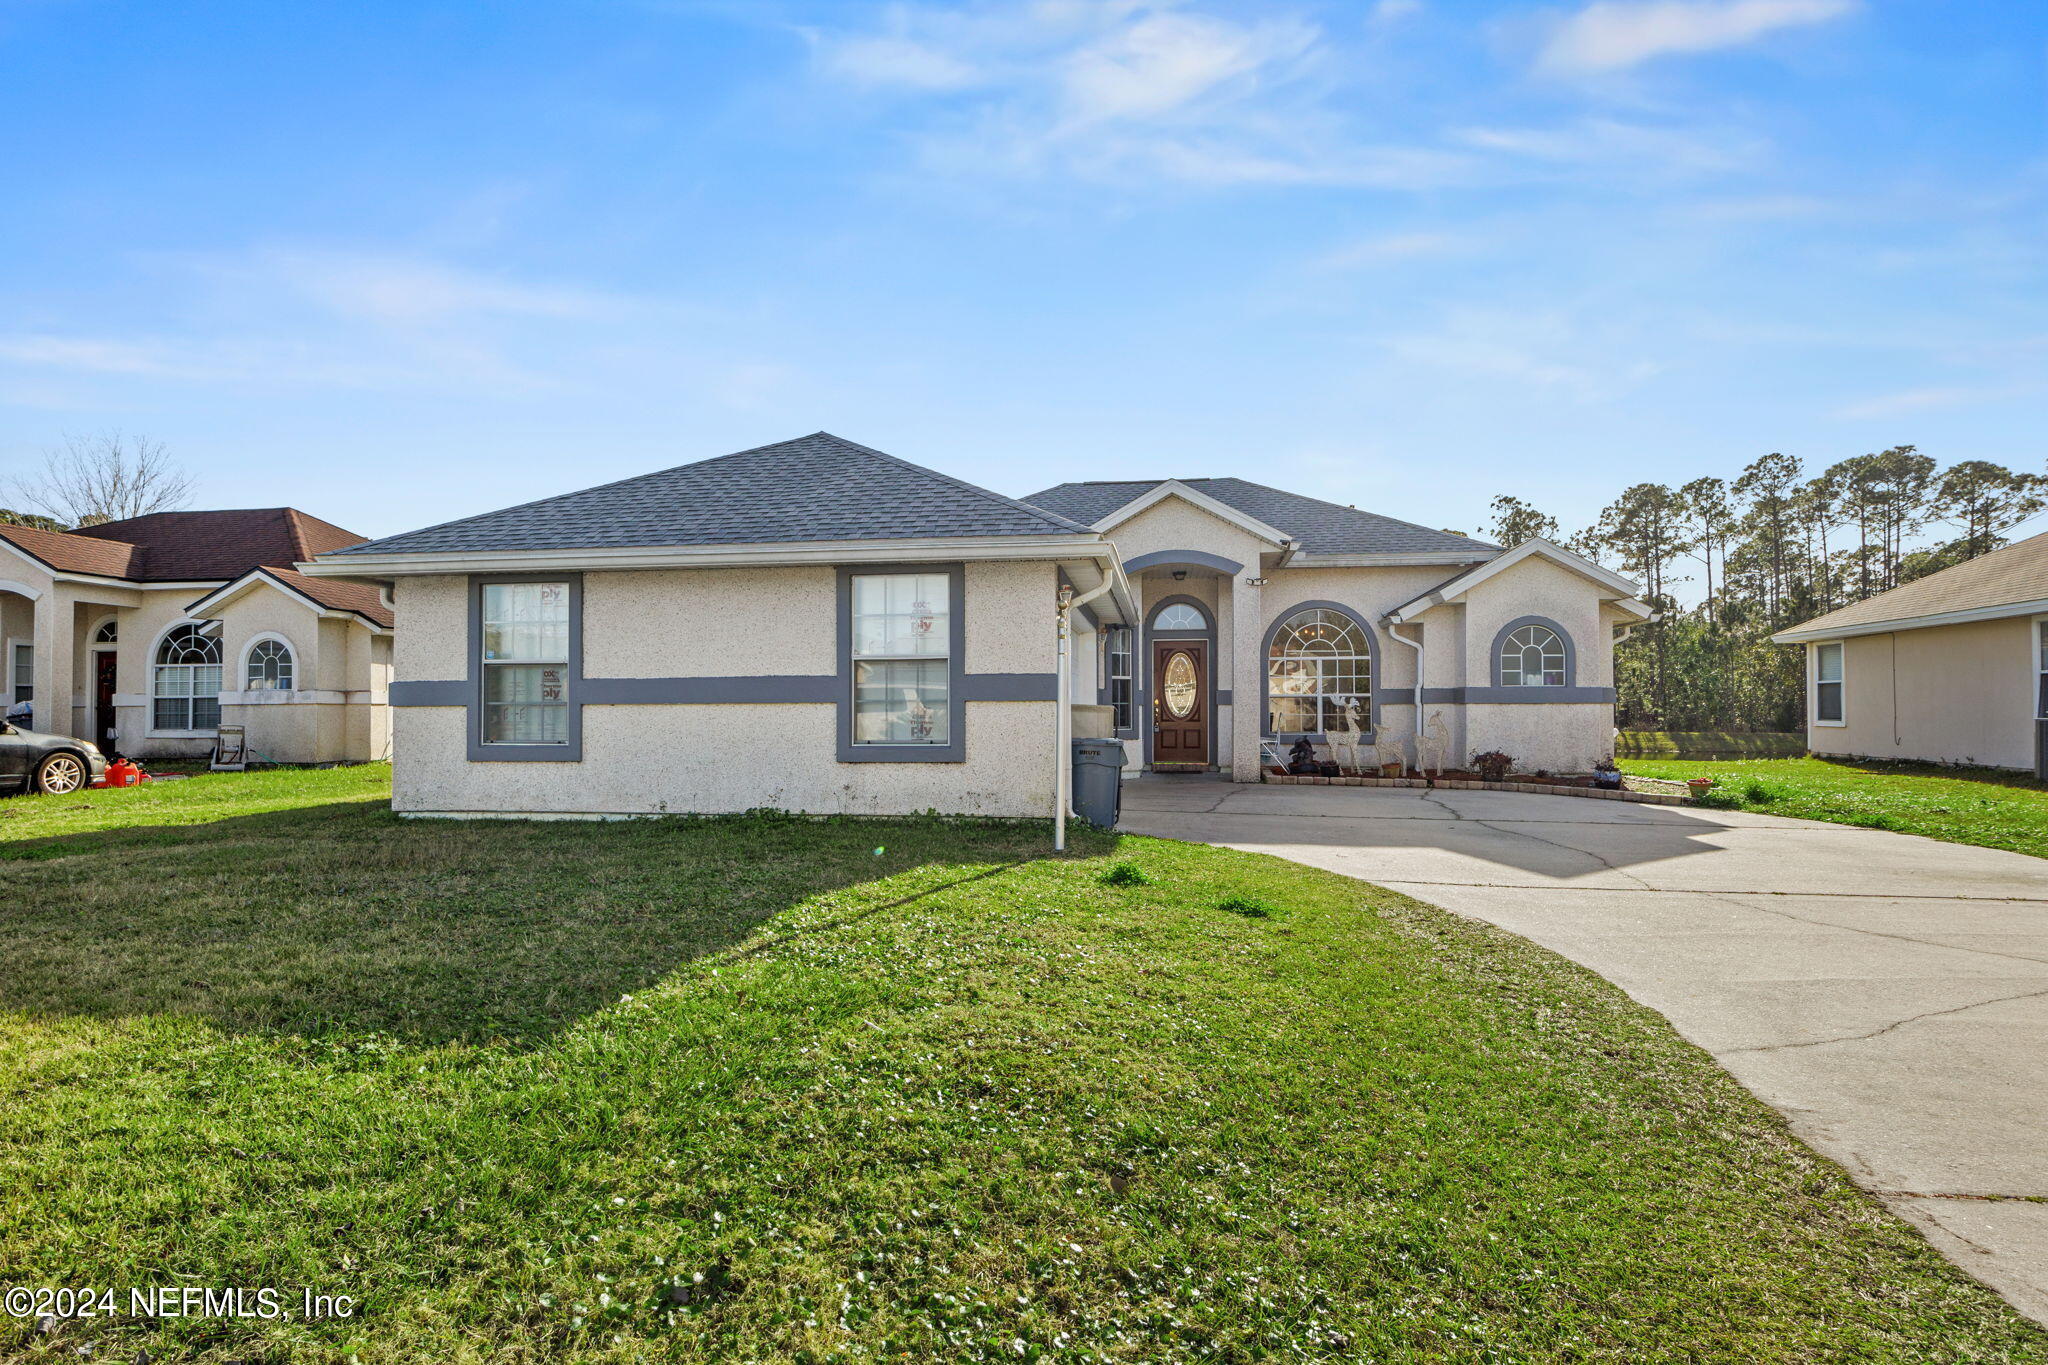 Green Cove Springs, FL home for sale located at 3672 Arava Drive, Green Cove Springs, FL 32043